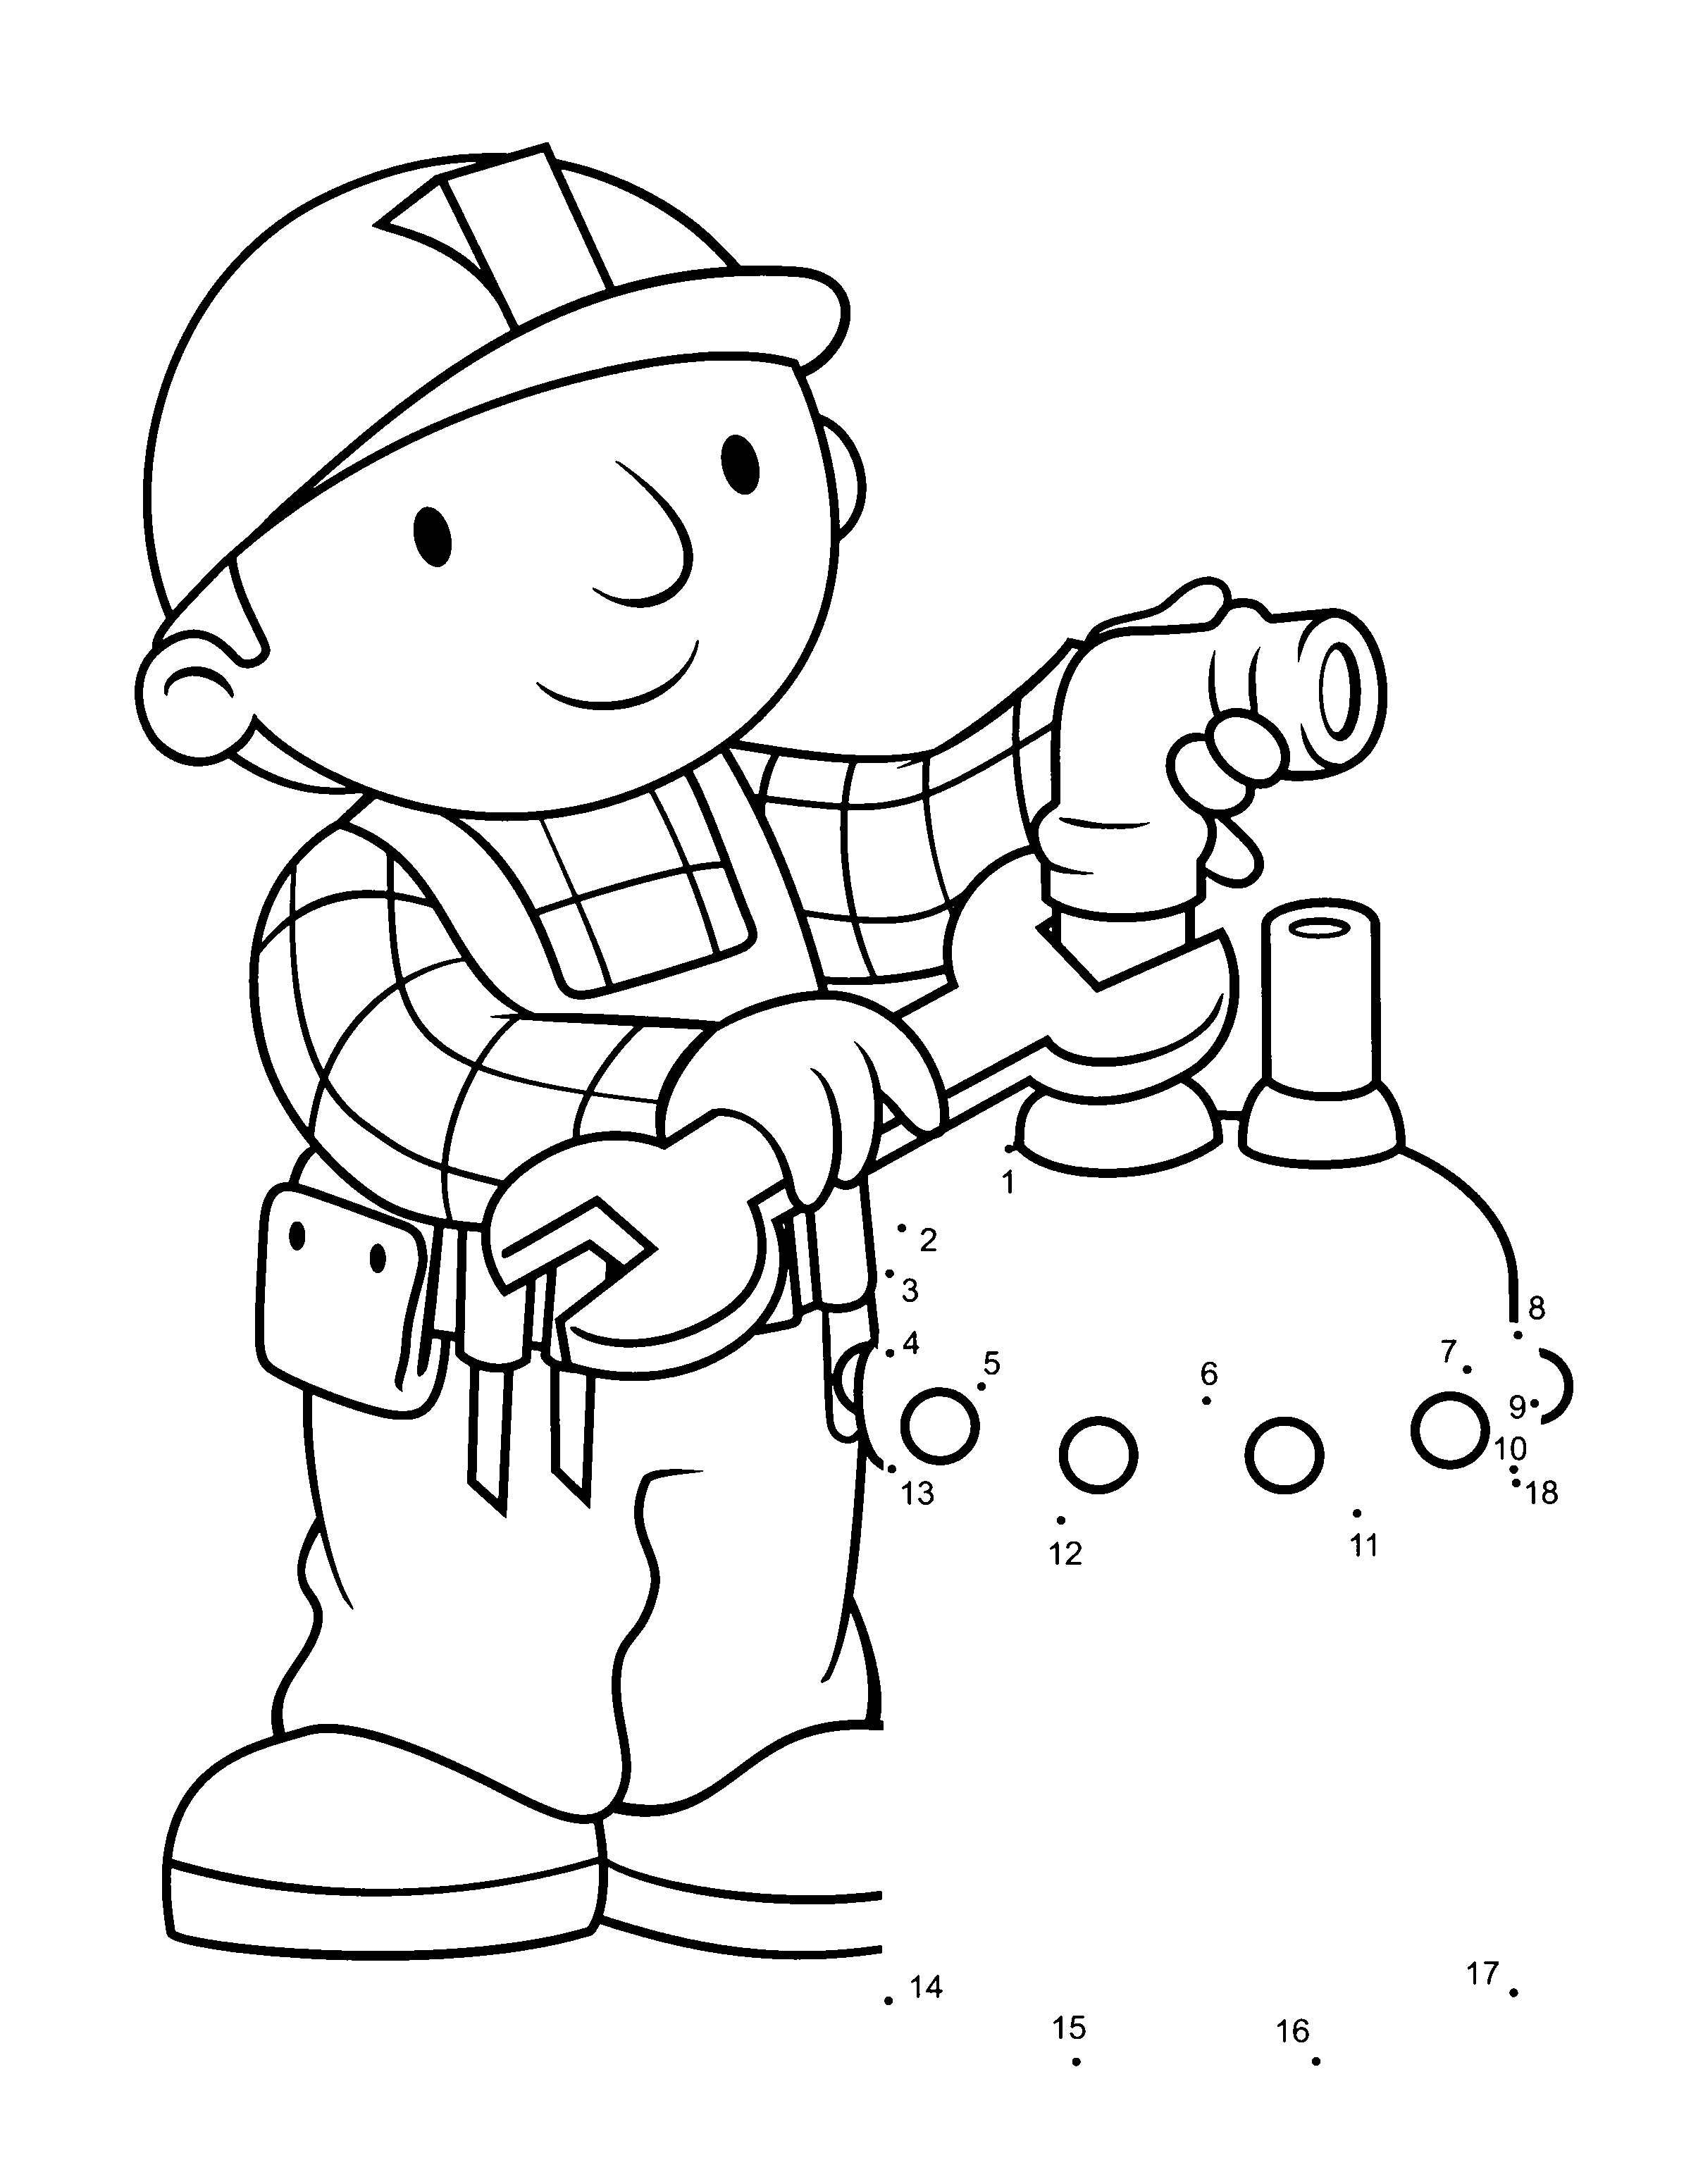 animated-coloring-pages-bob-the-builder-image-0004